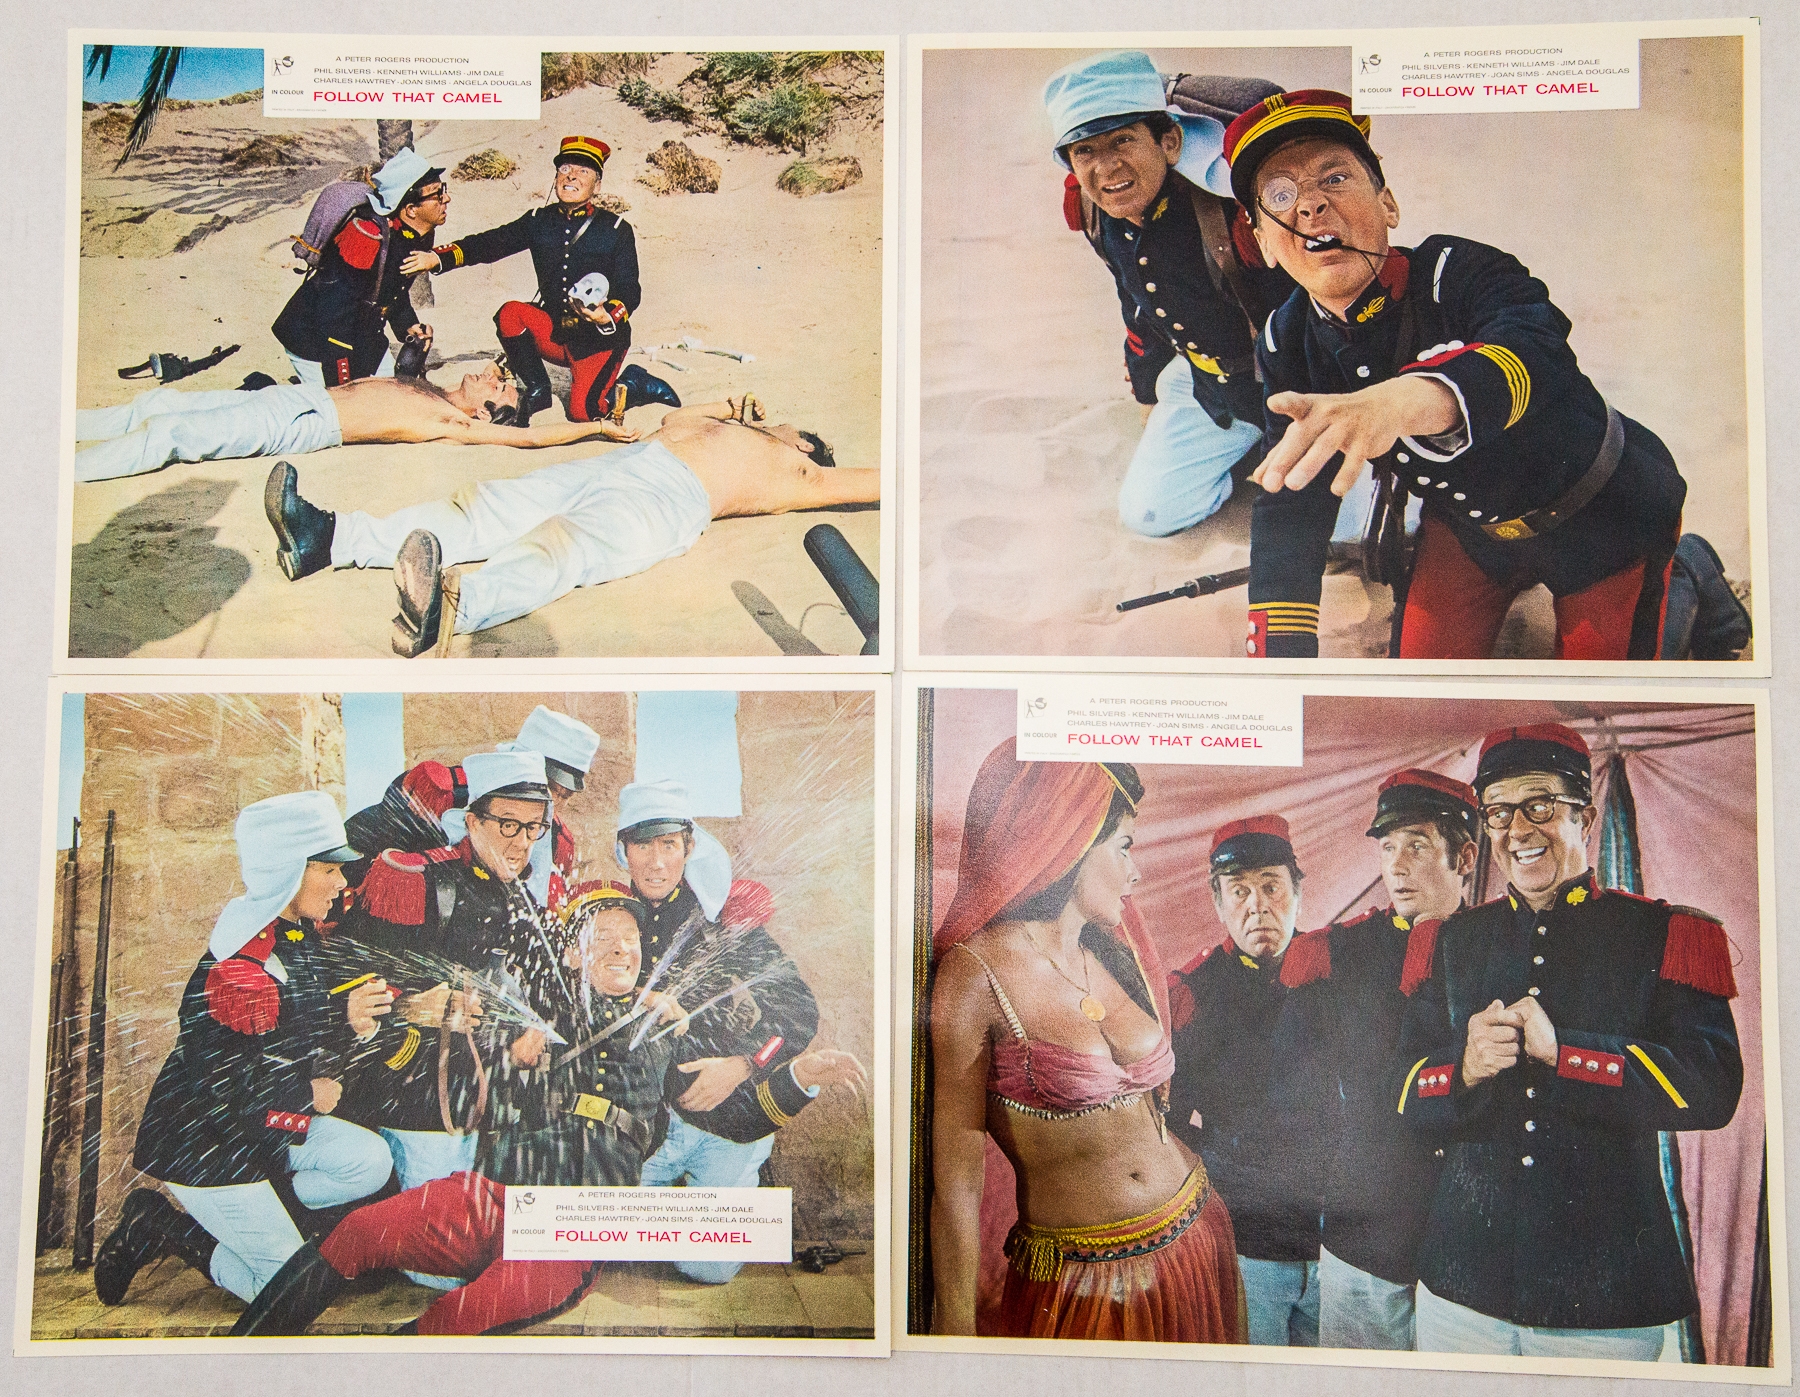 CARRY ON FOLLOW THAT CAMEL (1967) - UK Lobby Card Set - Very Fine plus - Flat/Unfolded (as issued) - - Image 2 of 2